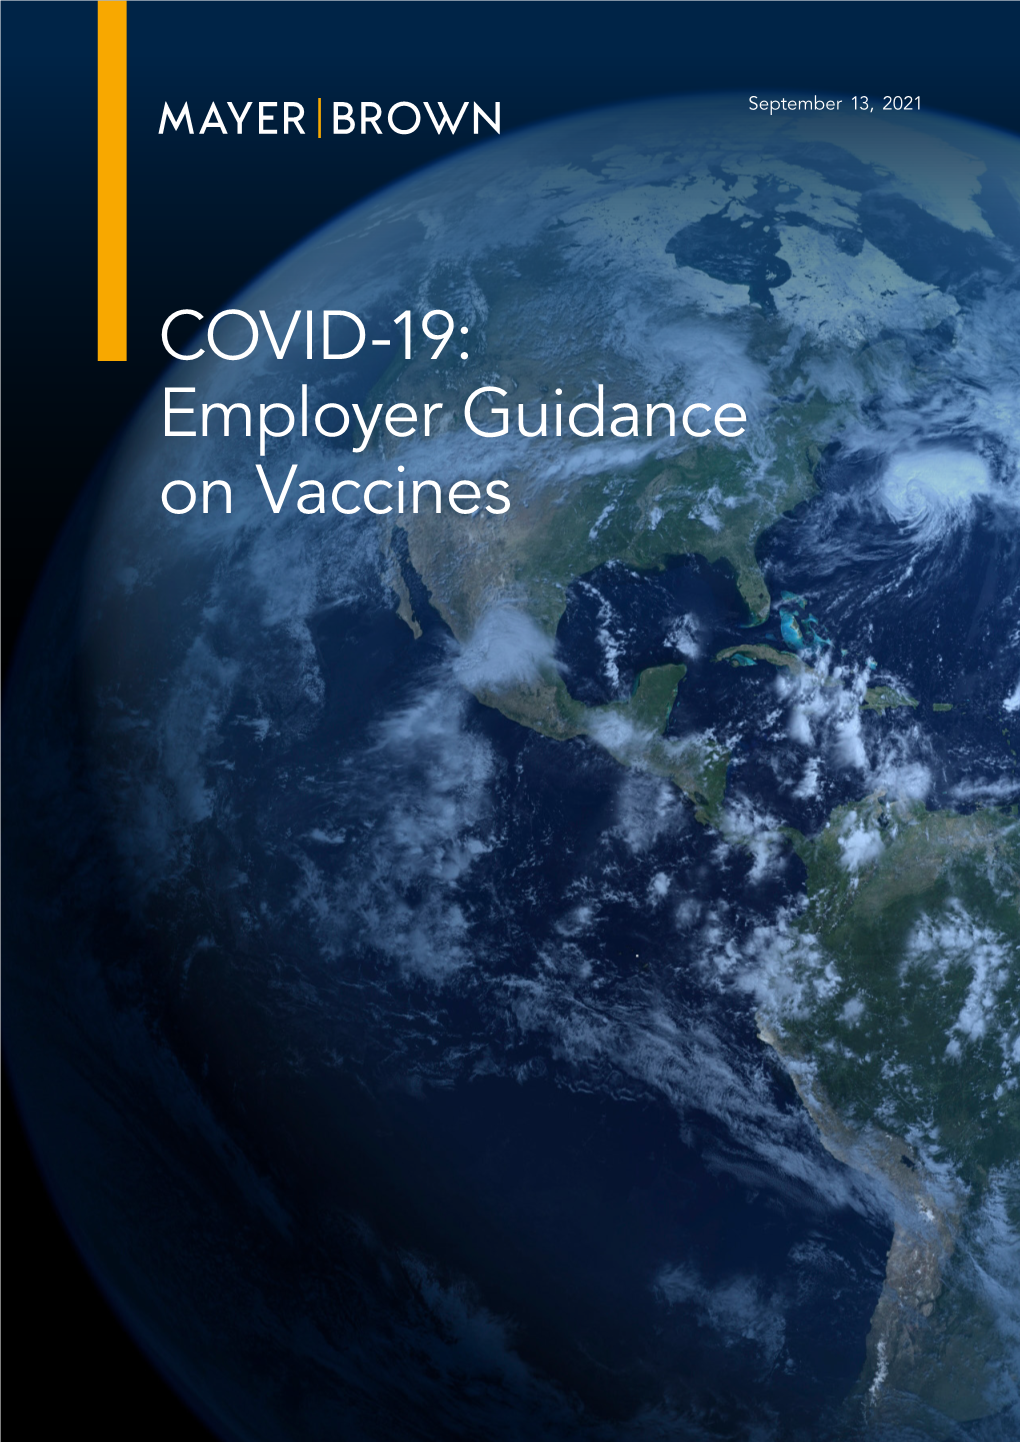 Mayer Brown COVID-19: Employer Guidance on Vaccines